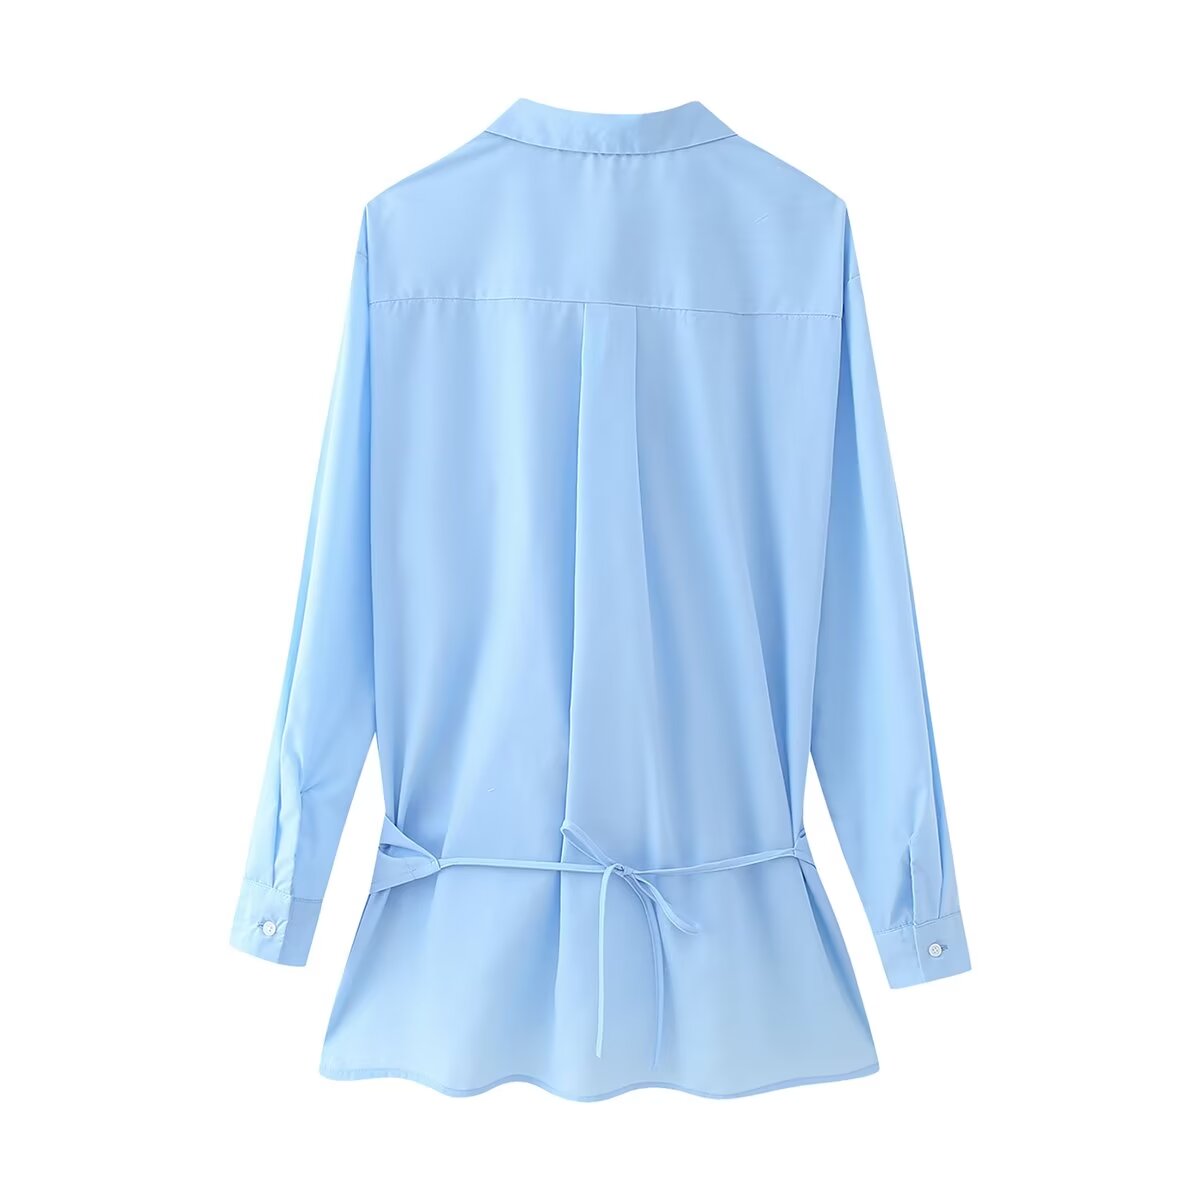 Early Spring Elegant Cross Design Office Cosmo Lady Shirt Women